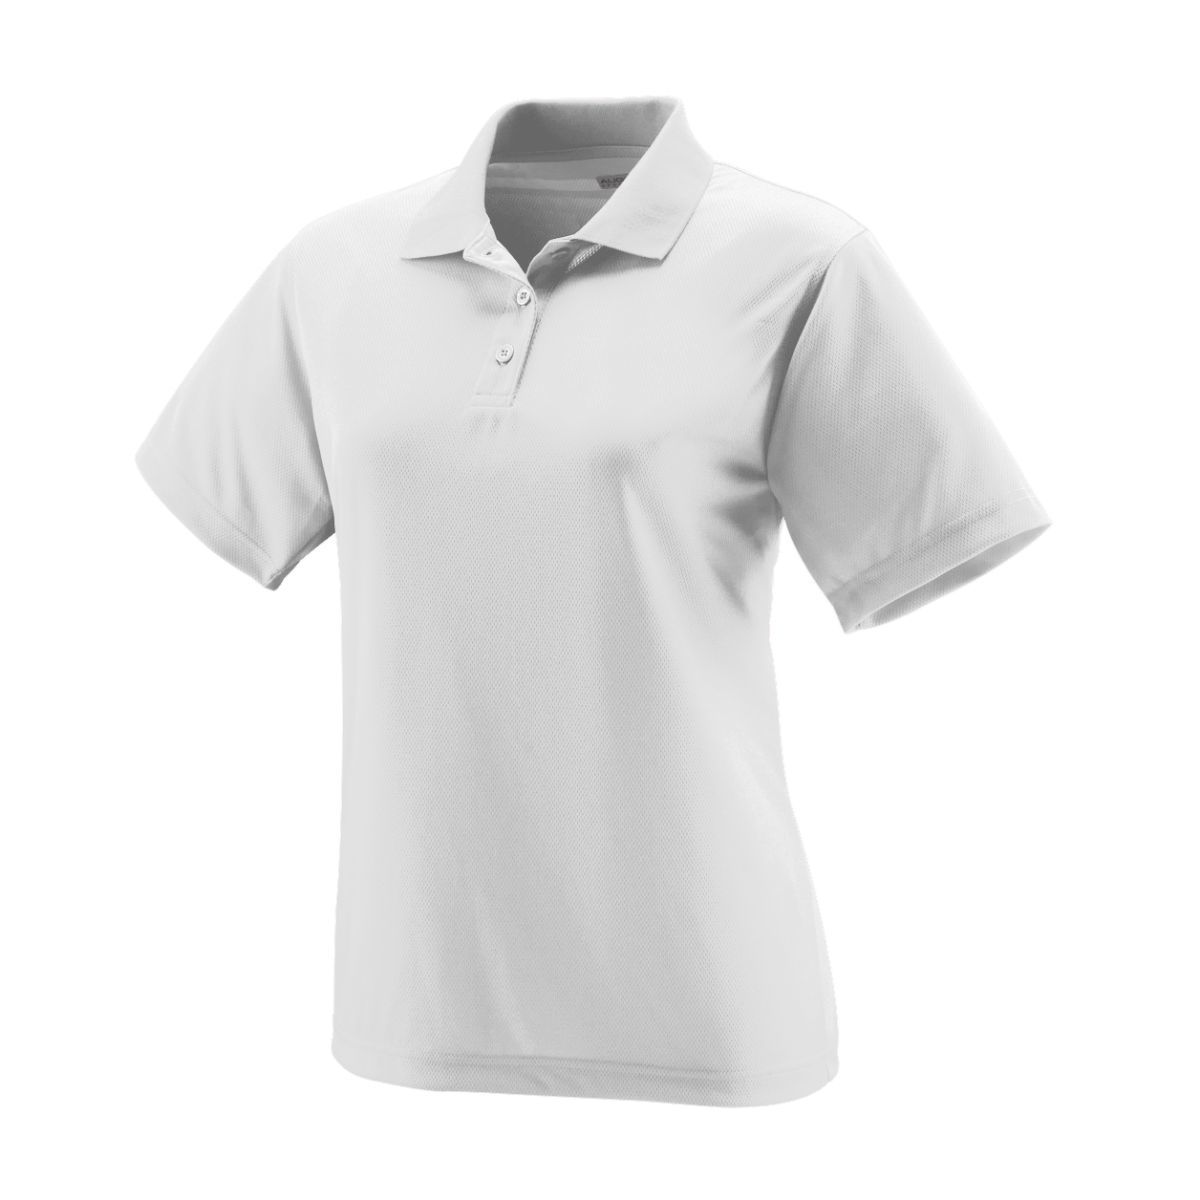 Augusta Sportswear Ladies Wicking Mesh Polo in White  -Part of the Ladies, Ladies-Polo, Polos, Augusta-Products, Tennis, Shirts product lines at KanaleyCreations.com